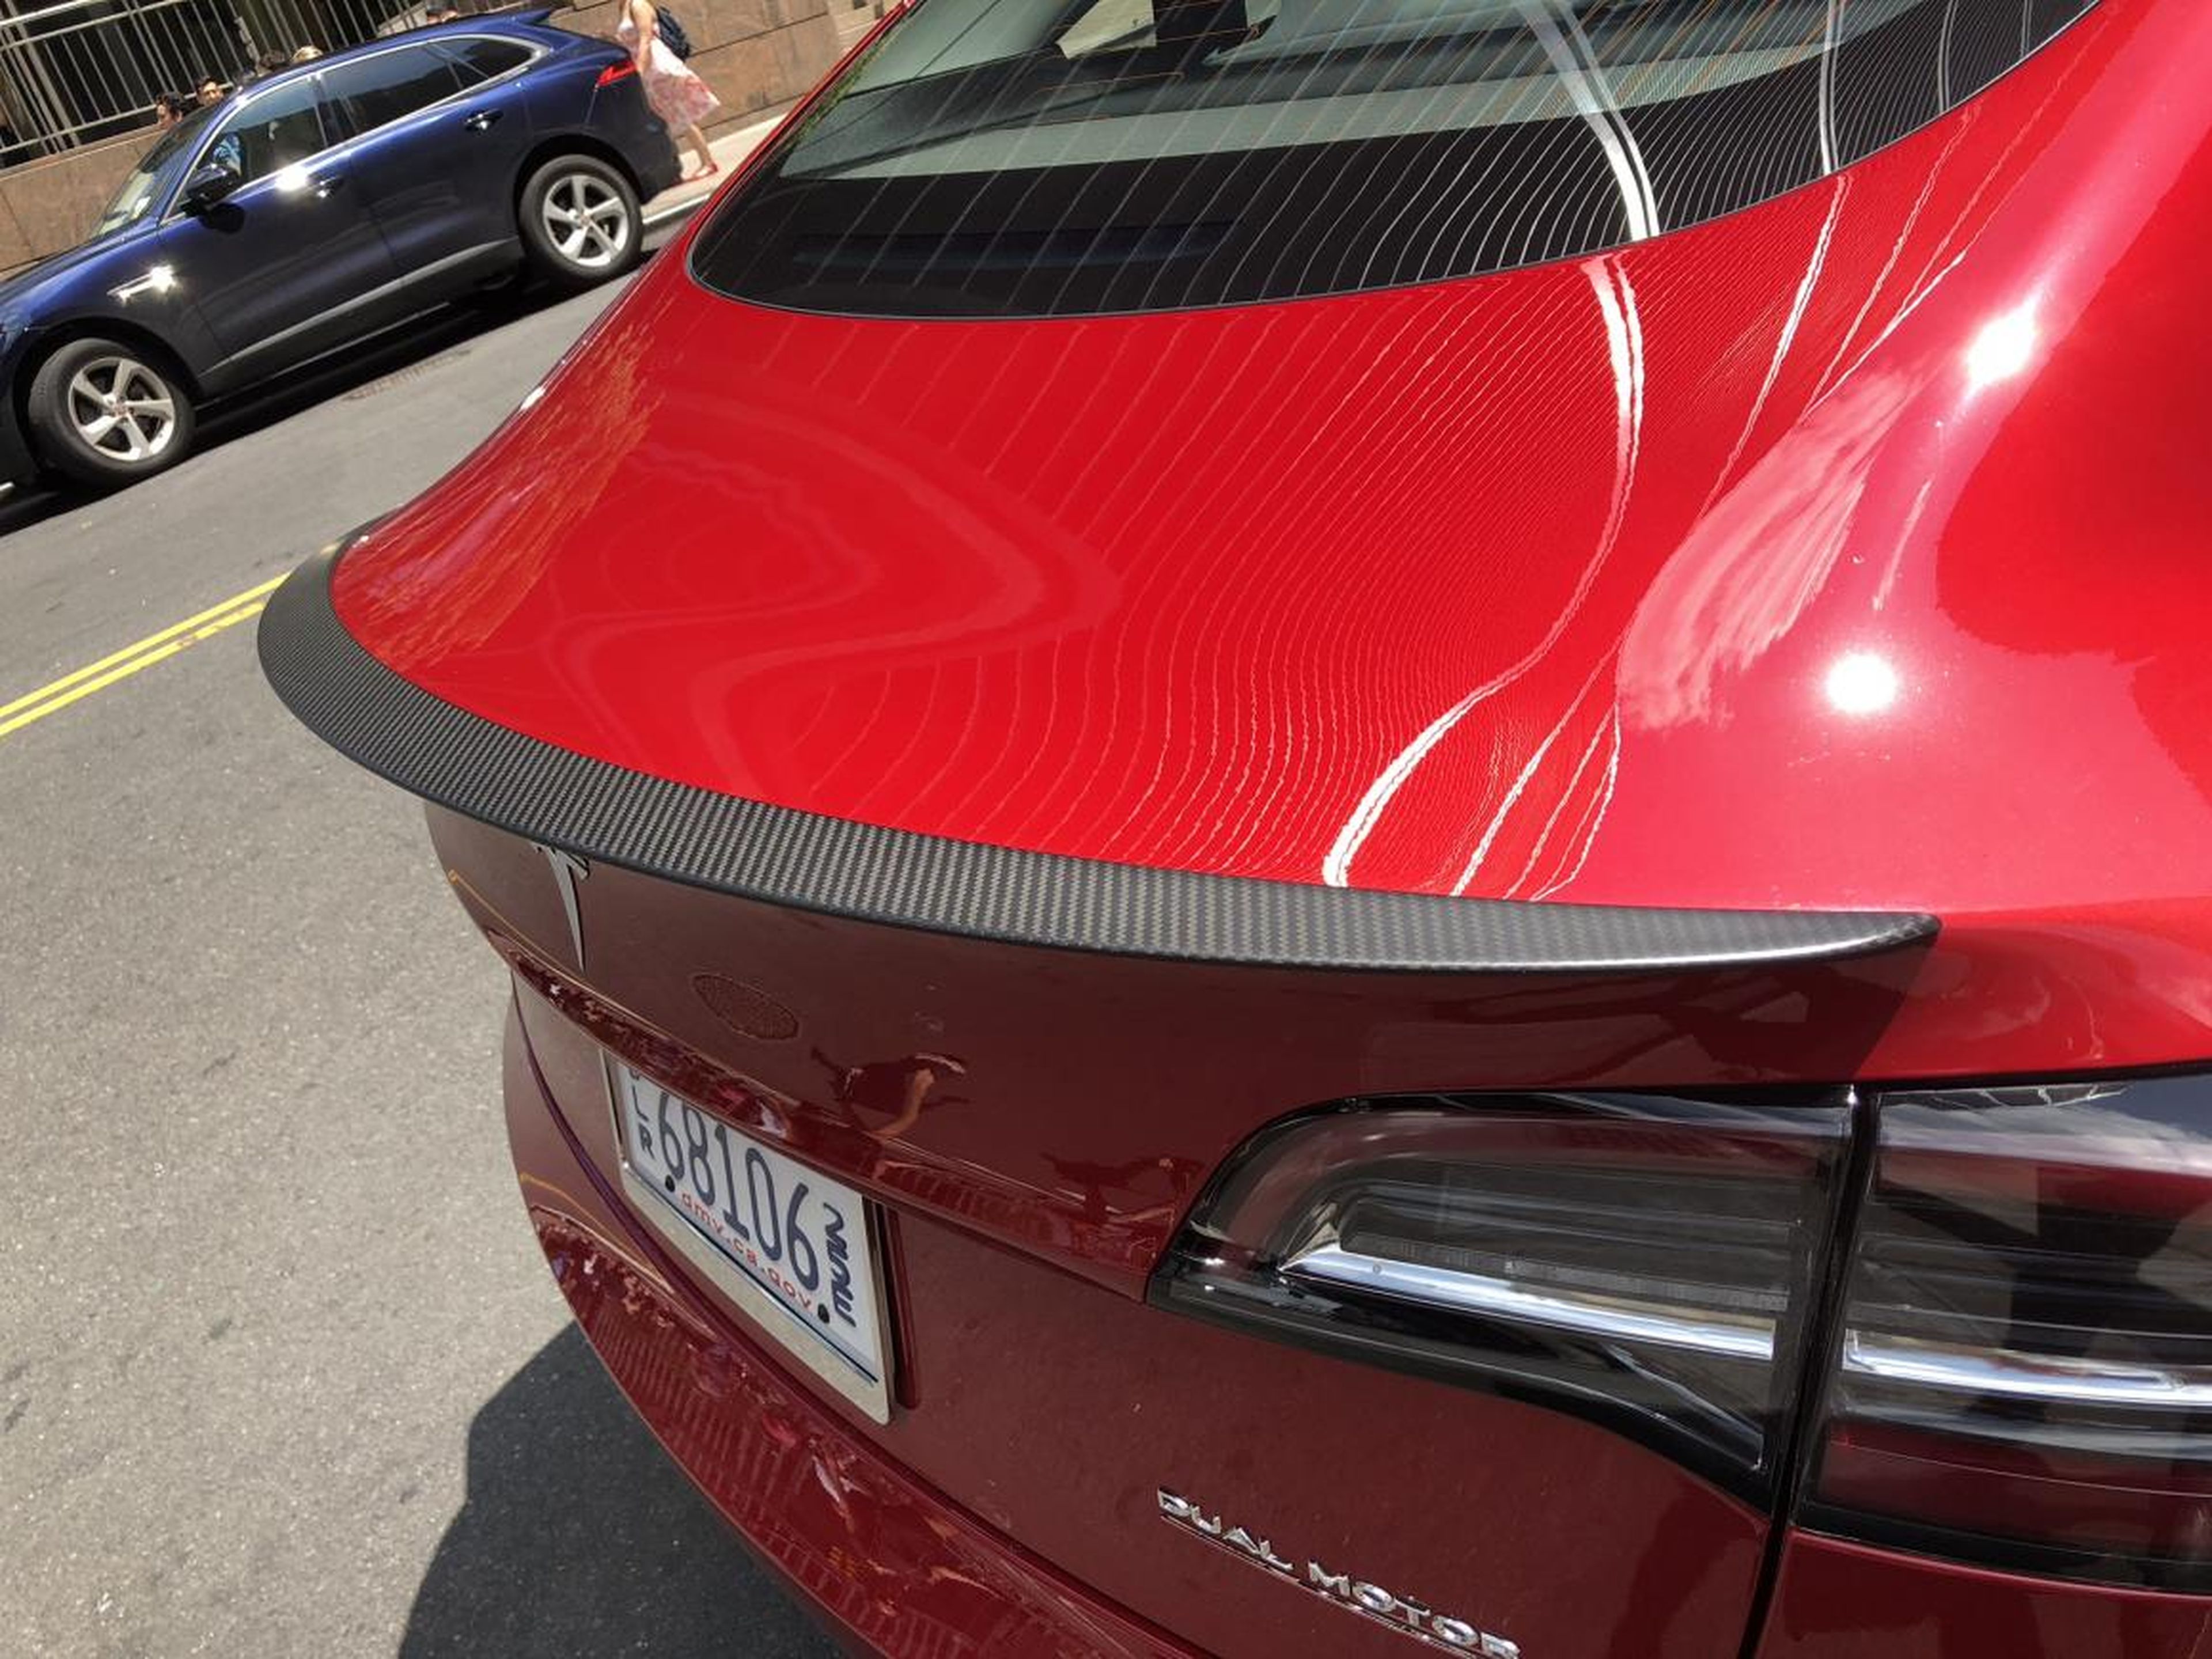 8. The Tesla Model 3 Performance also gets some goodies the standard Model 3 doesn't, including lowered suspension for better handling, a carbon-fiber spoiler for better aerodynamics, and aluminum alloy pedals and brakes.